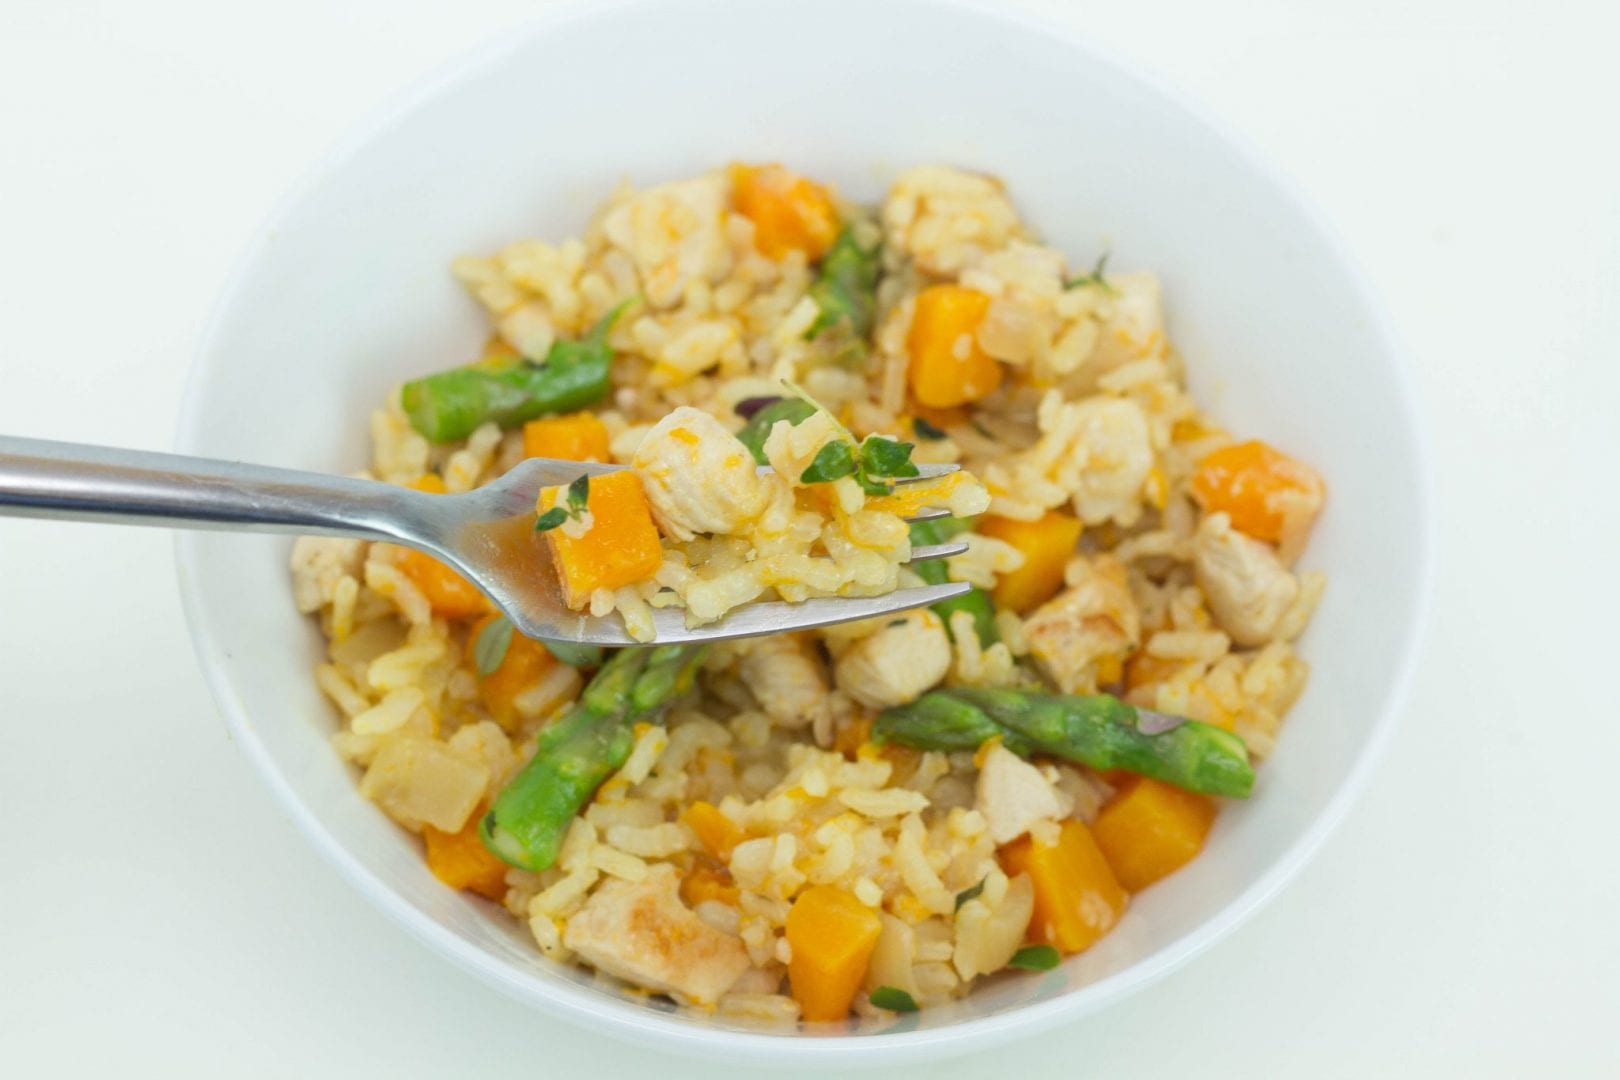 Leftover chicken risotto - turn leftover chicken into this tasty and delicious chicken risotto